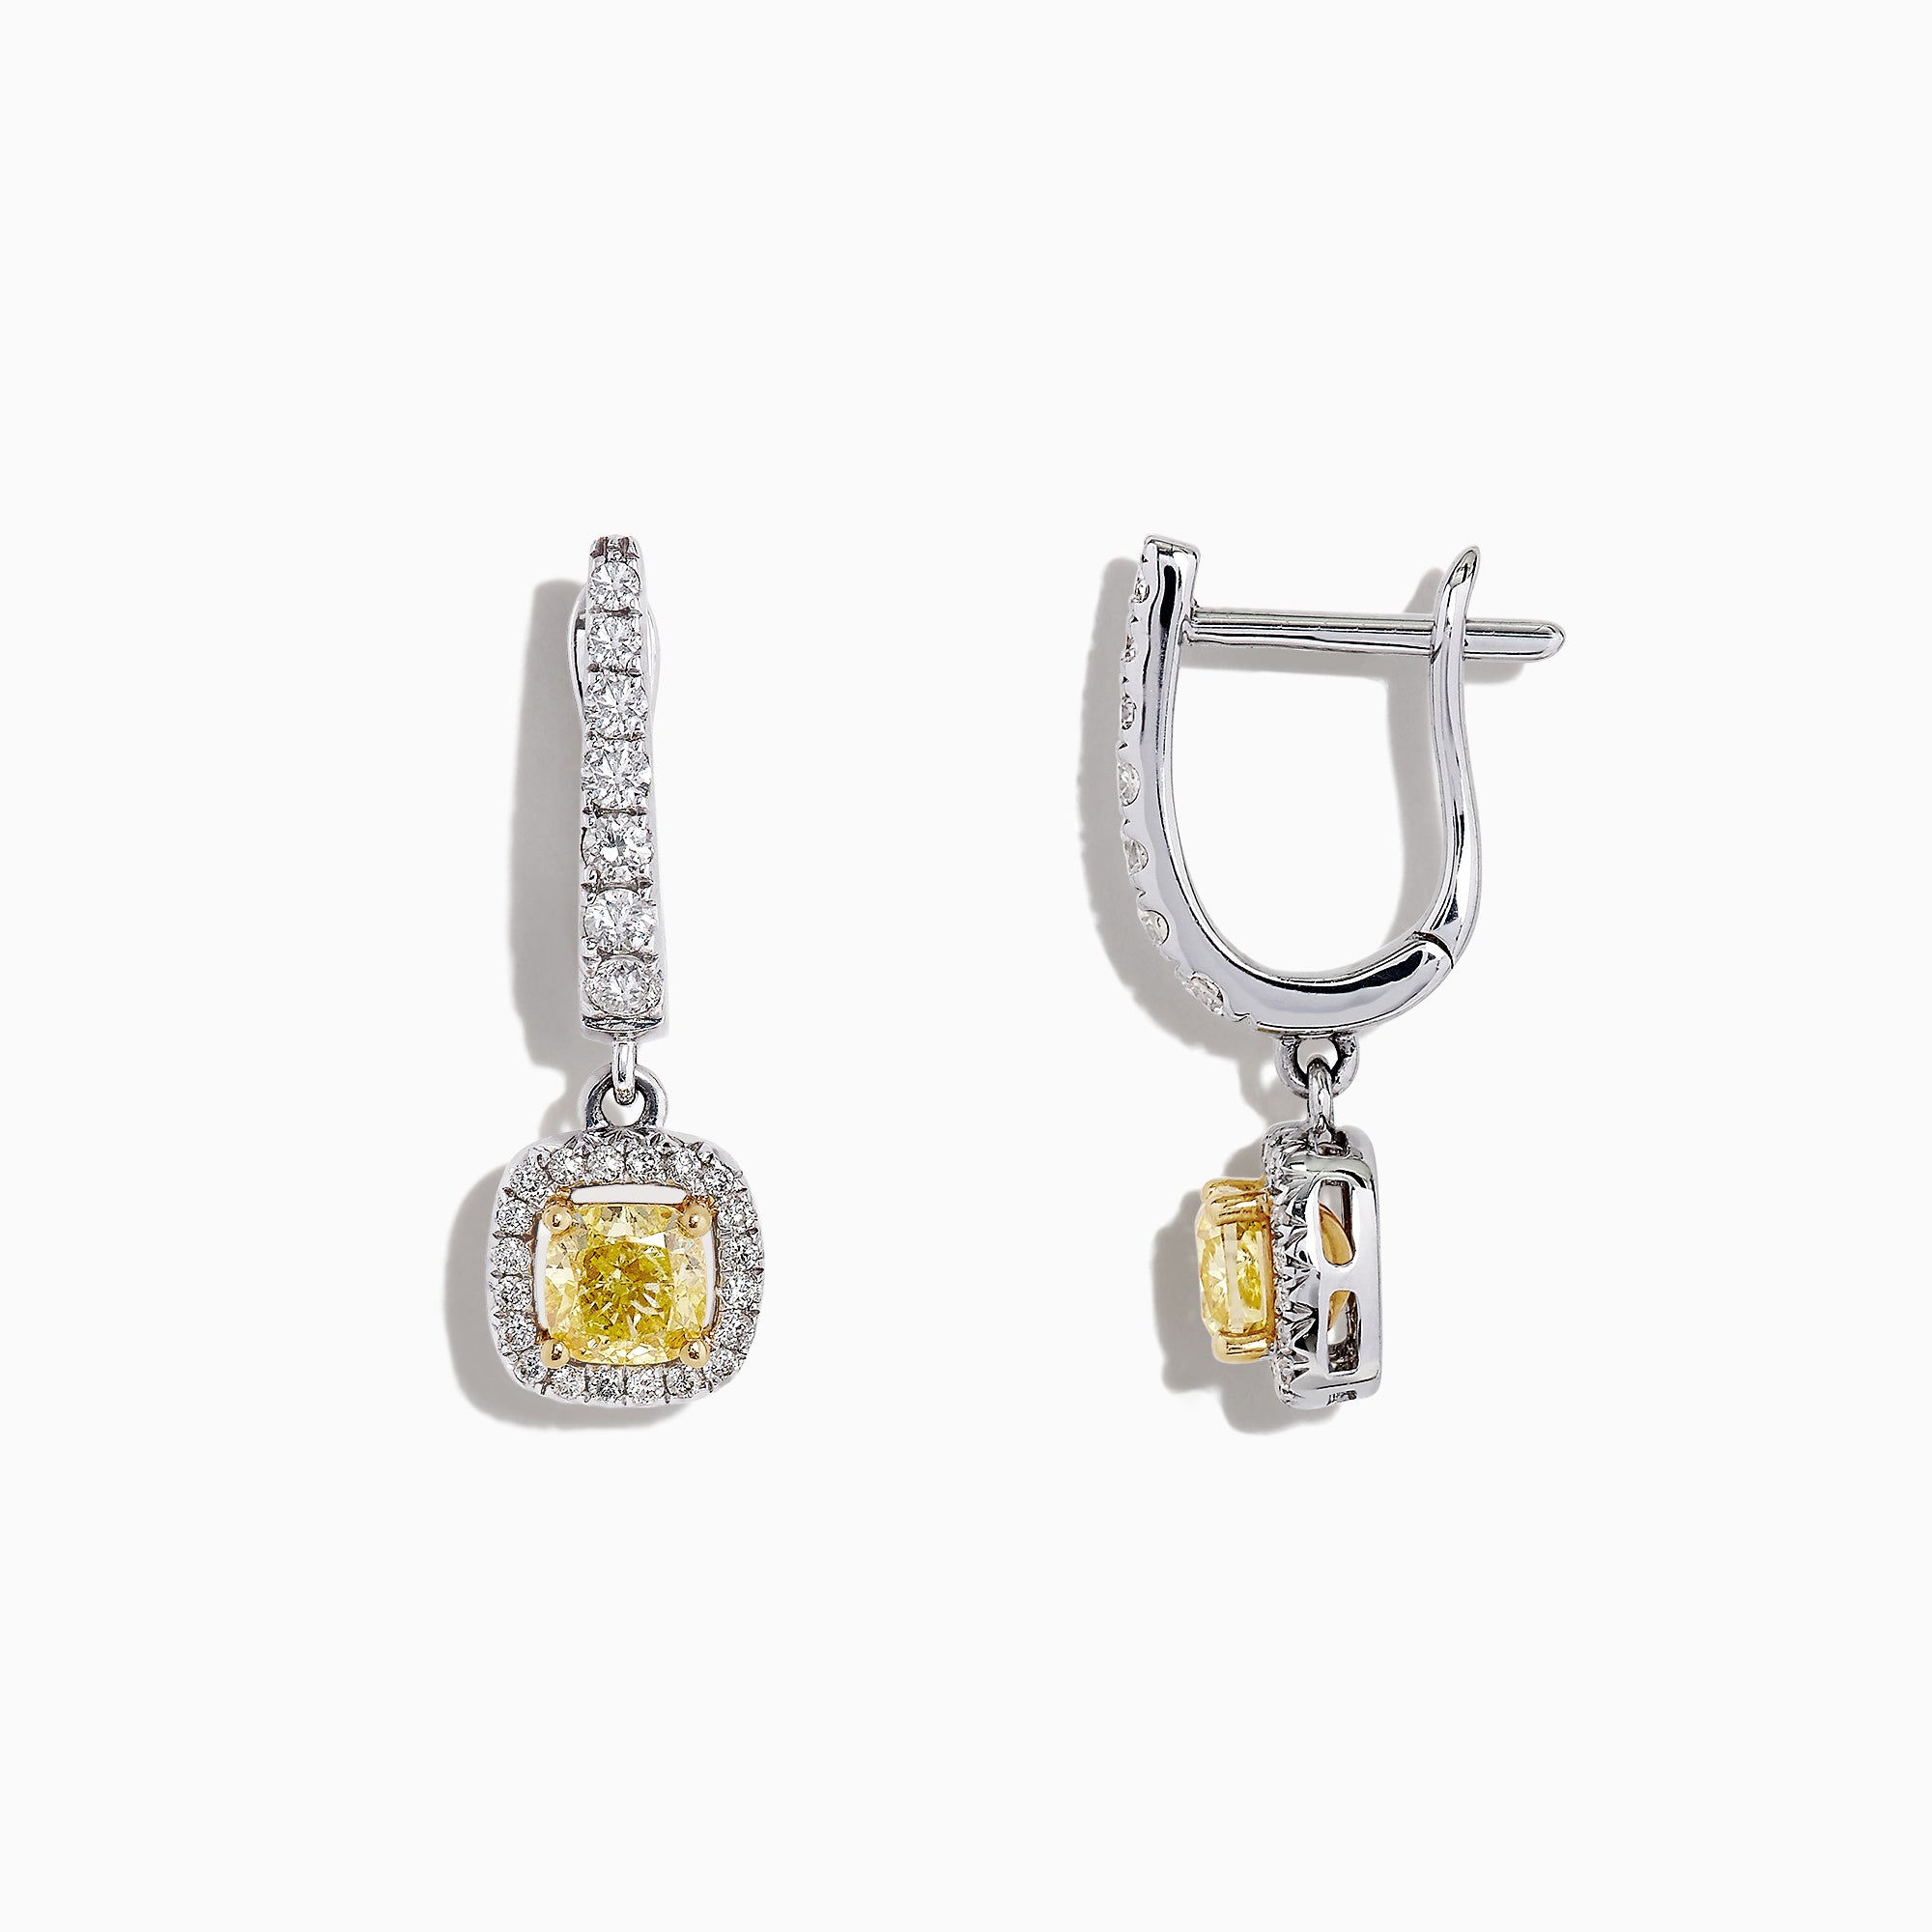 Aggregate more than 195 white and yellow earrings